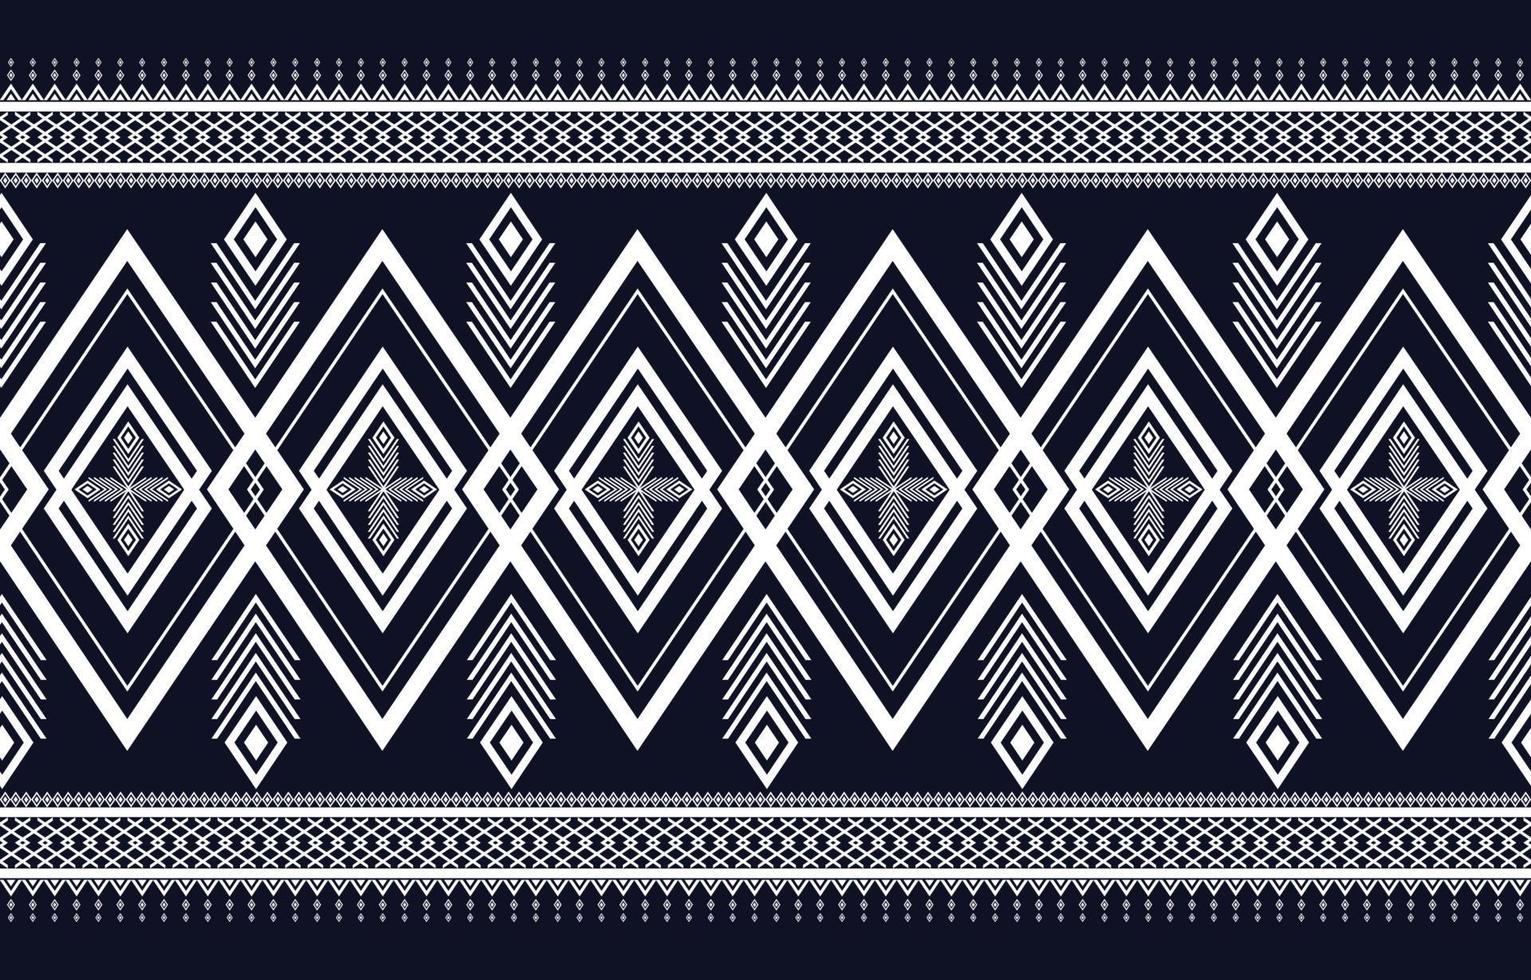 Abstract ethnic geometric pattern Designs for backgrounds or wallpapers, carpets, batik, traditional textiles native patterns. vector illustration